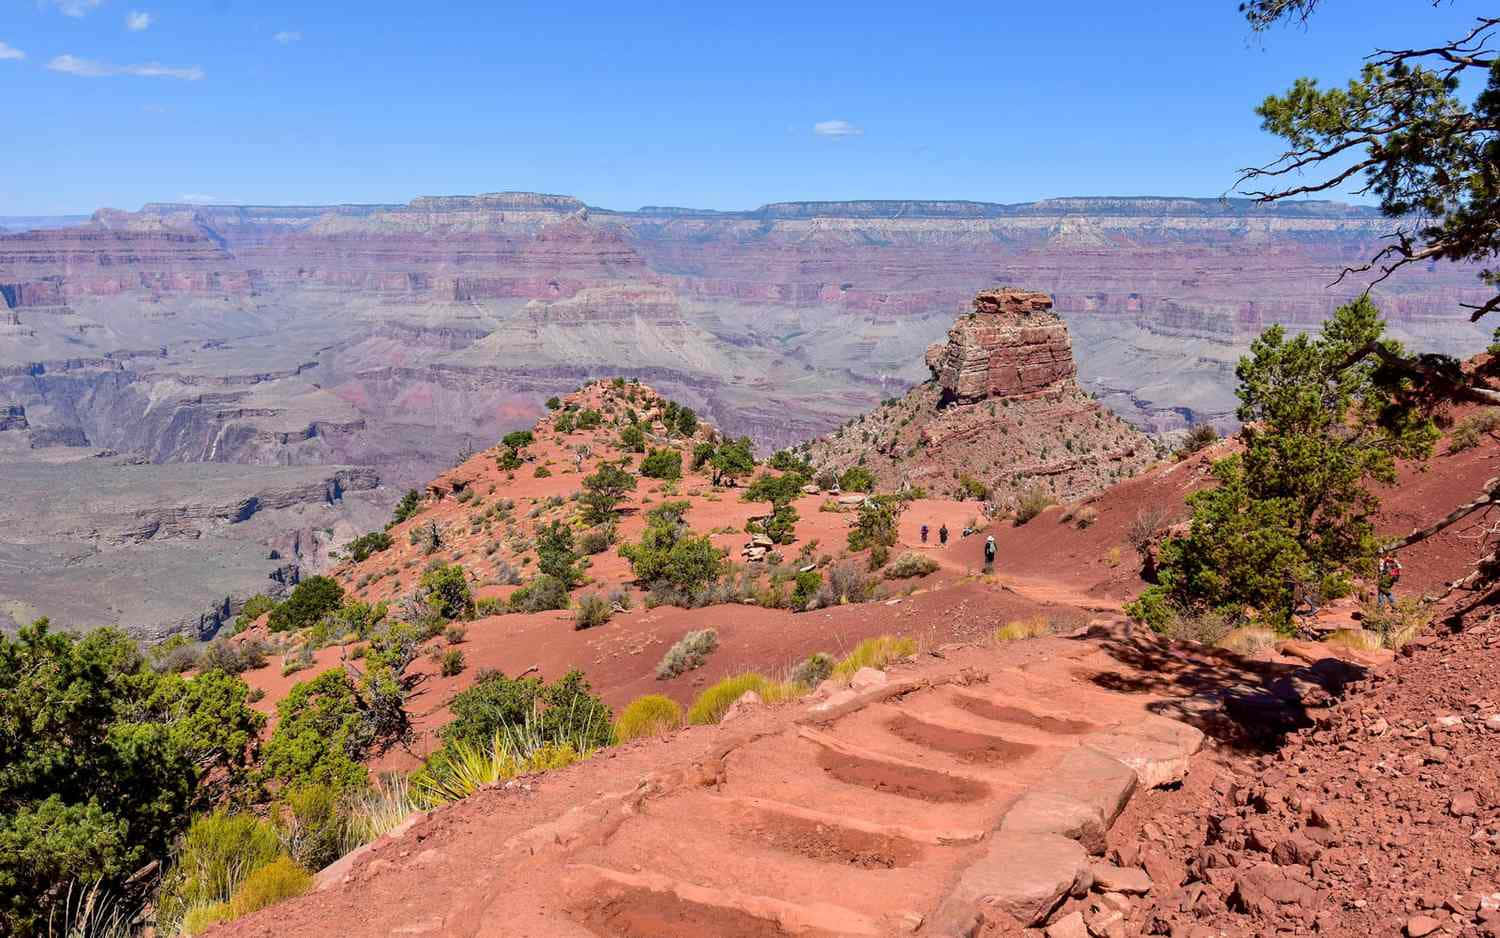 "Experience Nature at the Grand Canyon"